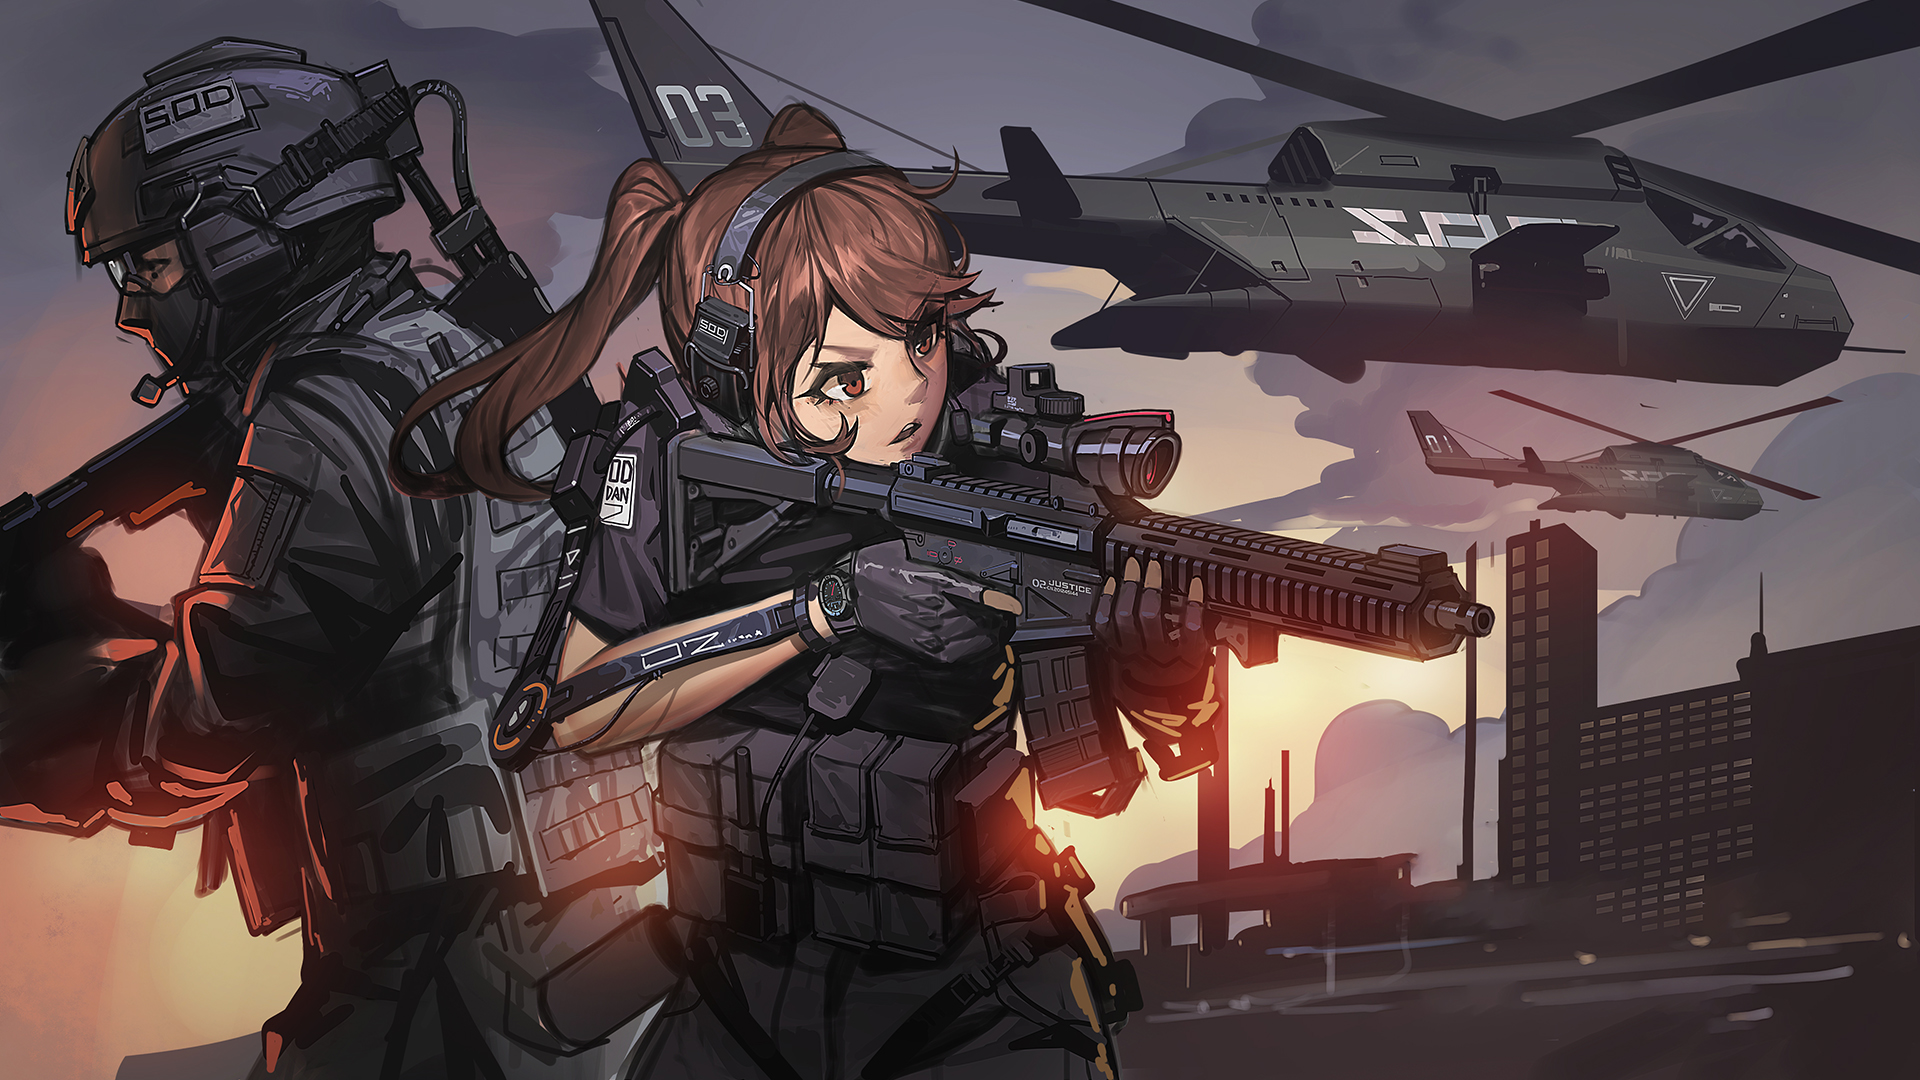 Anime 1920x1080 helicopters gun Exoskeleton Black Soldier girls with guns military anime girls brunette gloves watch sky clouds aircraft uniform helmet aiming sunlight building twintails